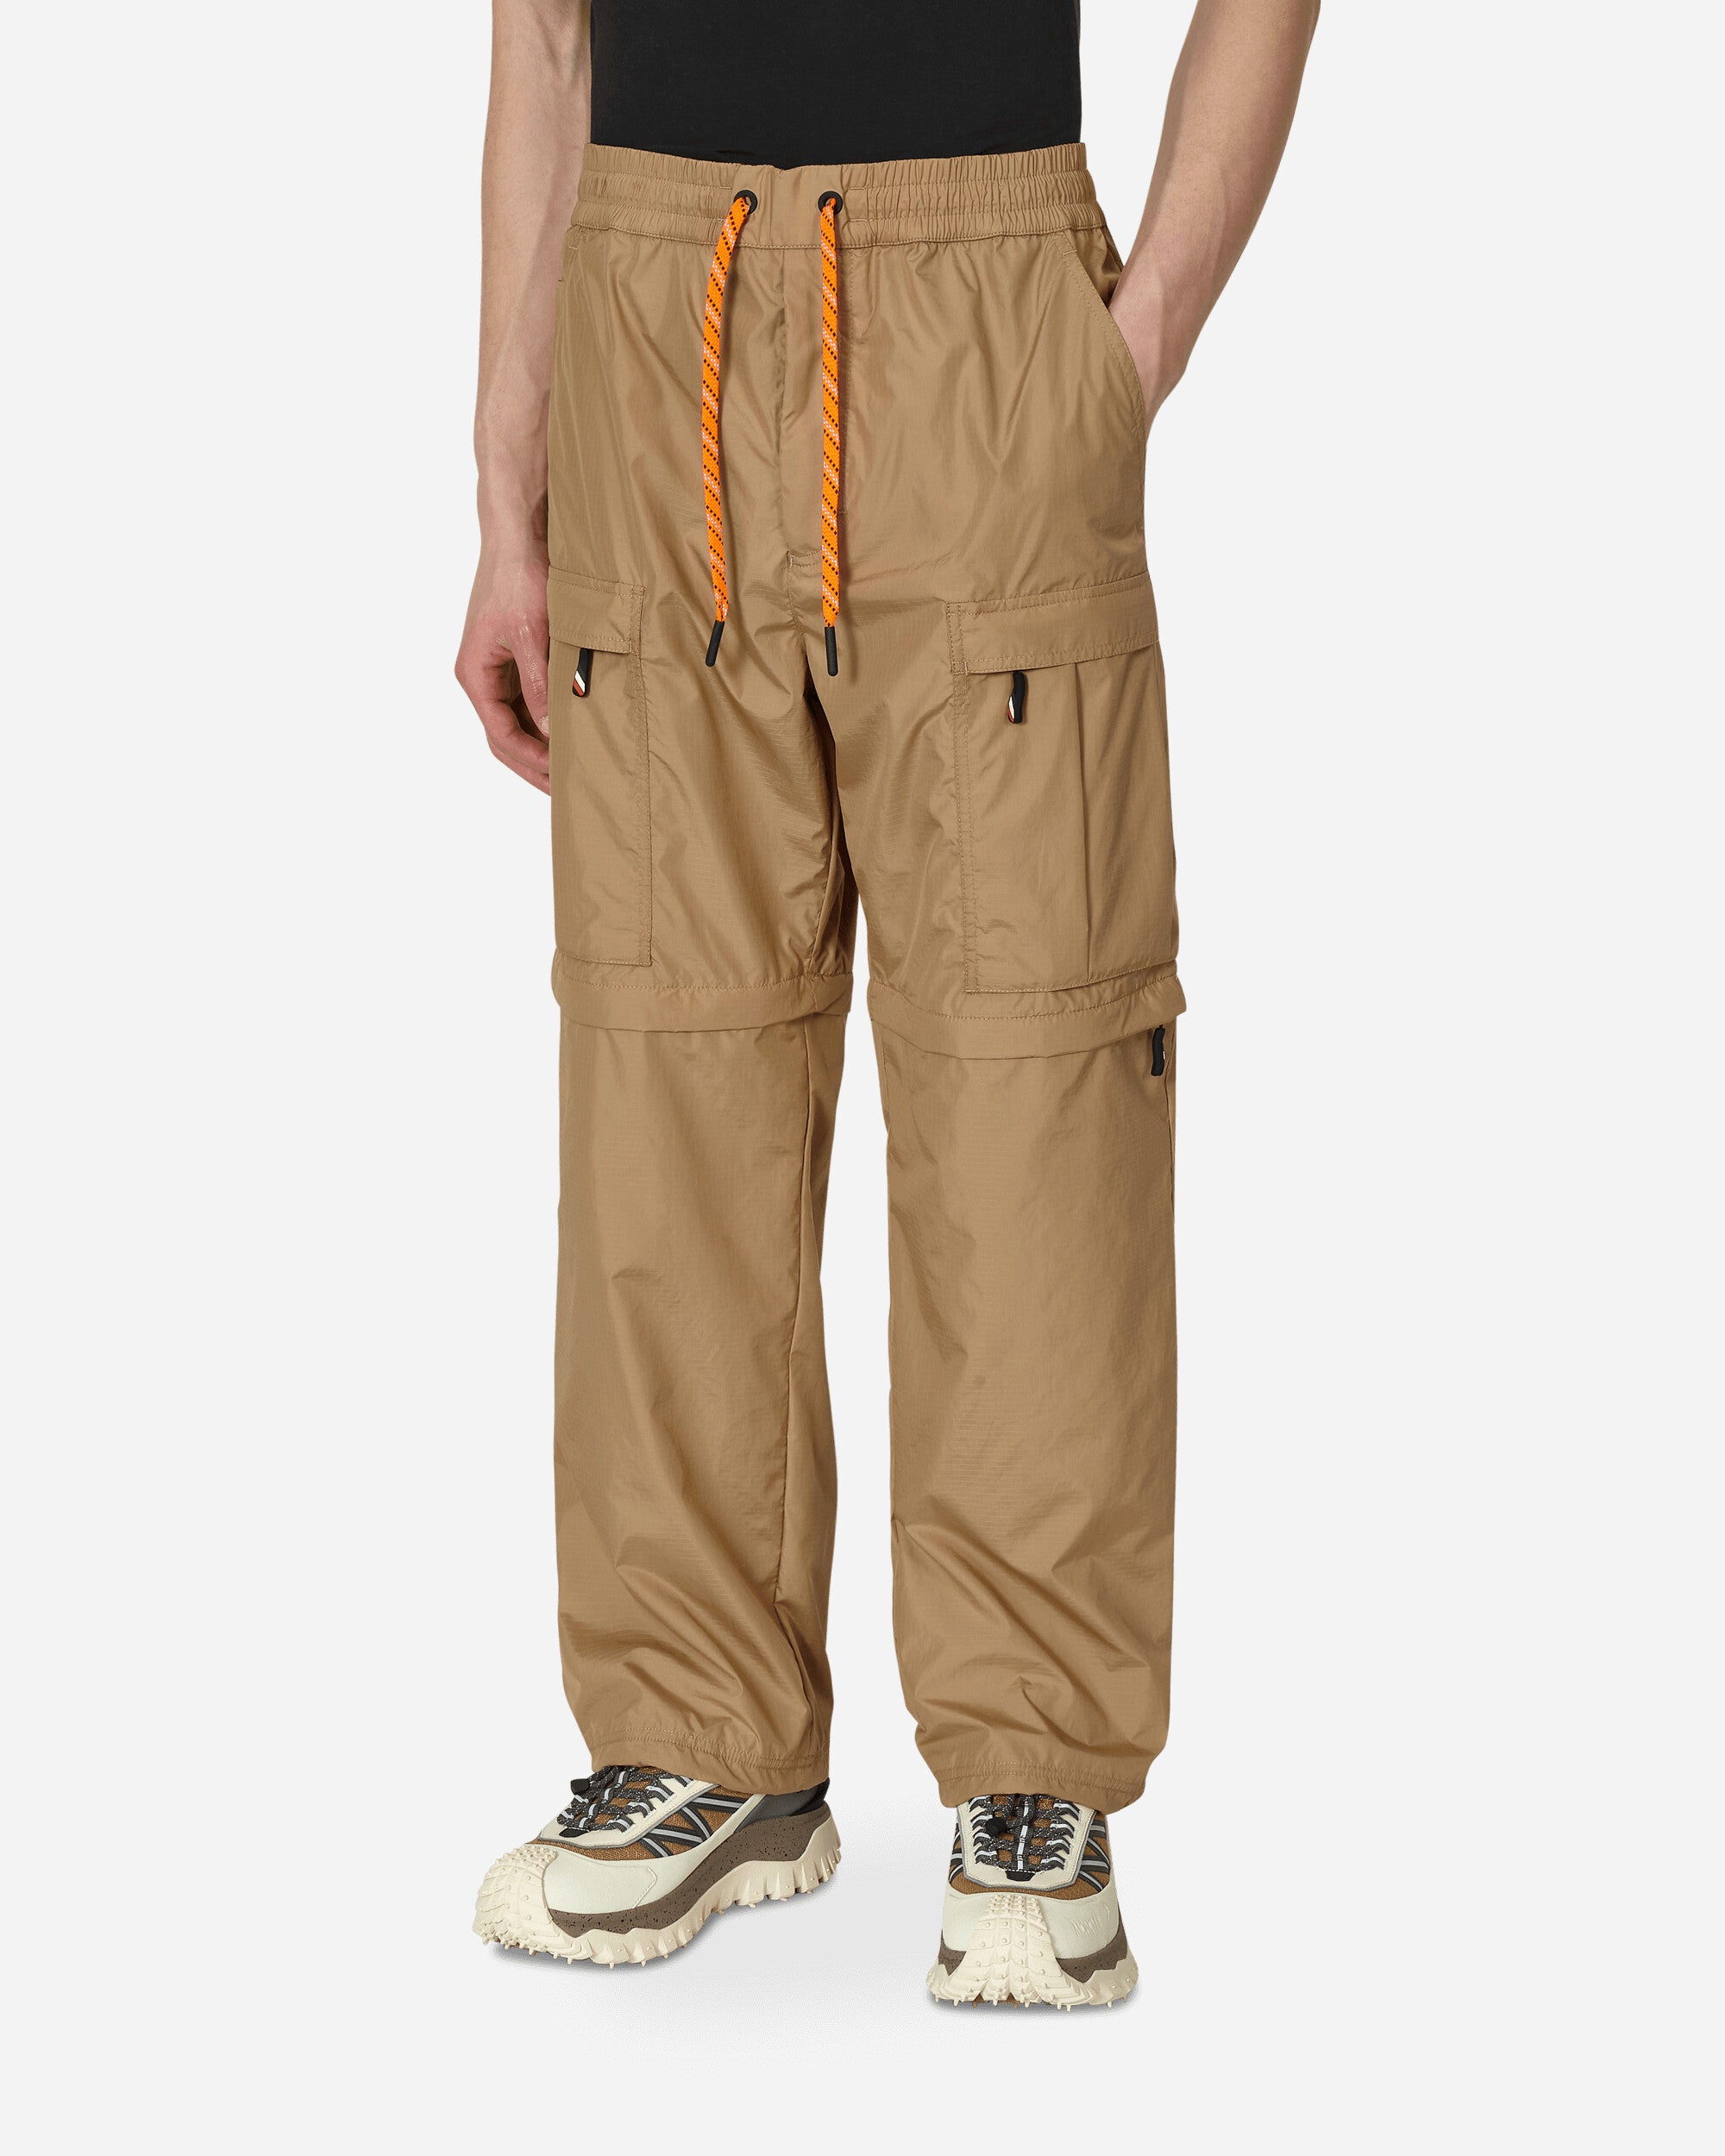 Day-Namic Convertible Cargo Pants Beige